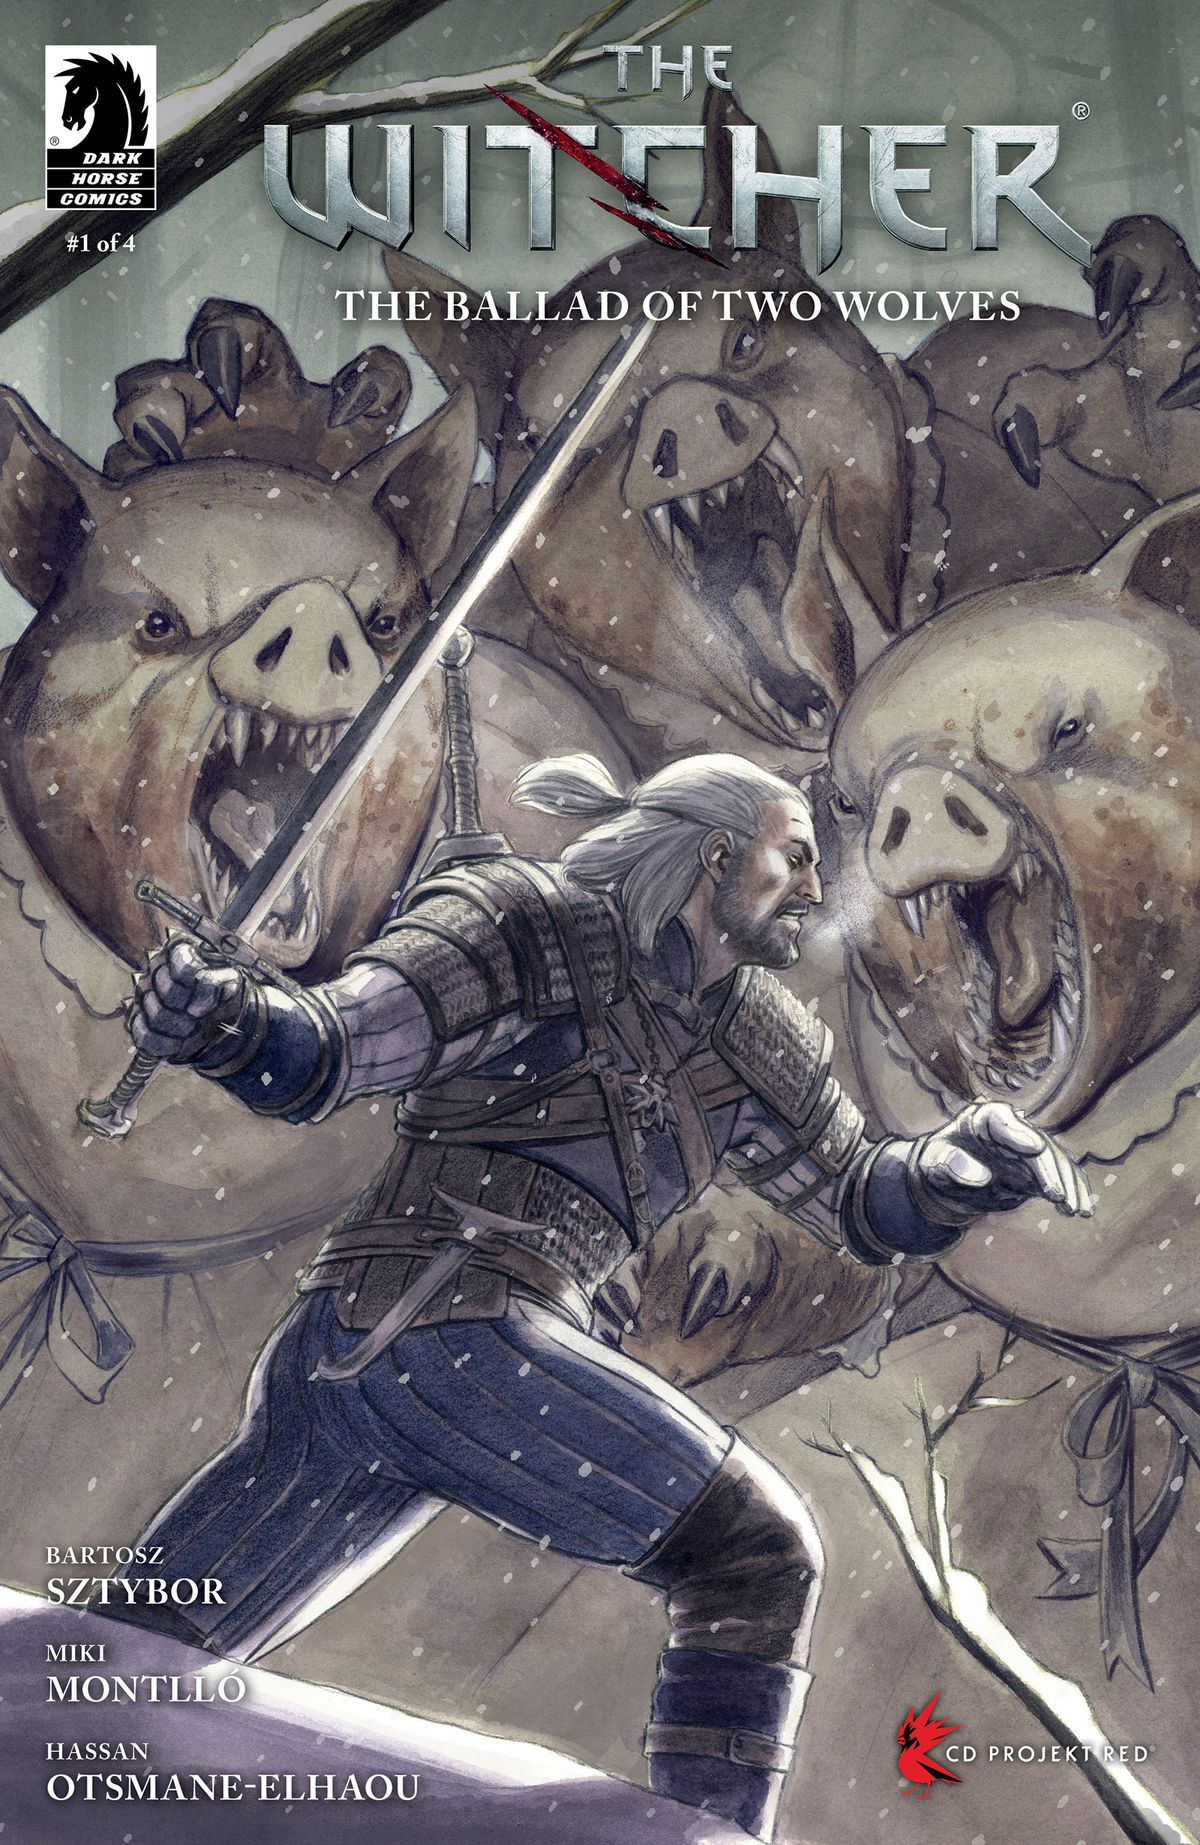 Geralt faces off against three huge and vicious-looking dress-wearing pigs on the cover of The Witcher: The Ballad of Two Wolves #1. 